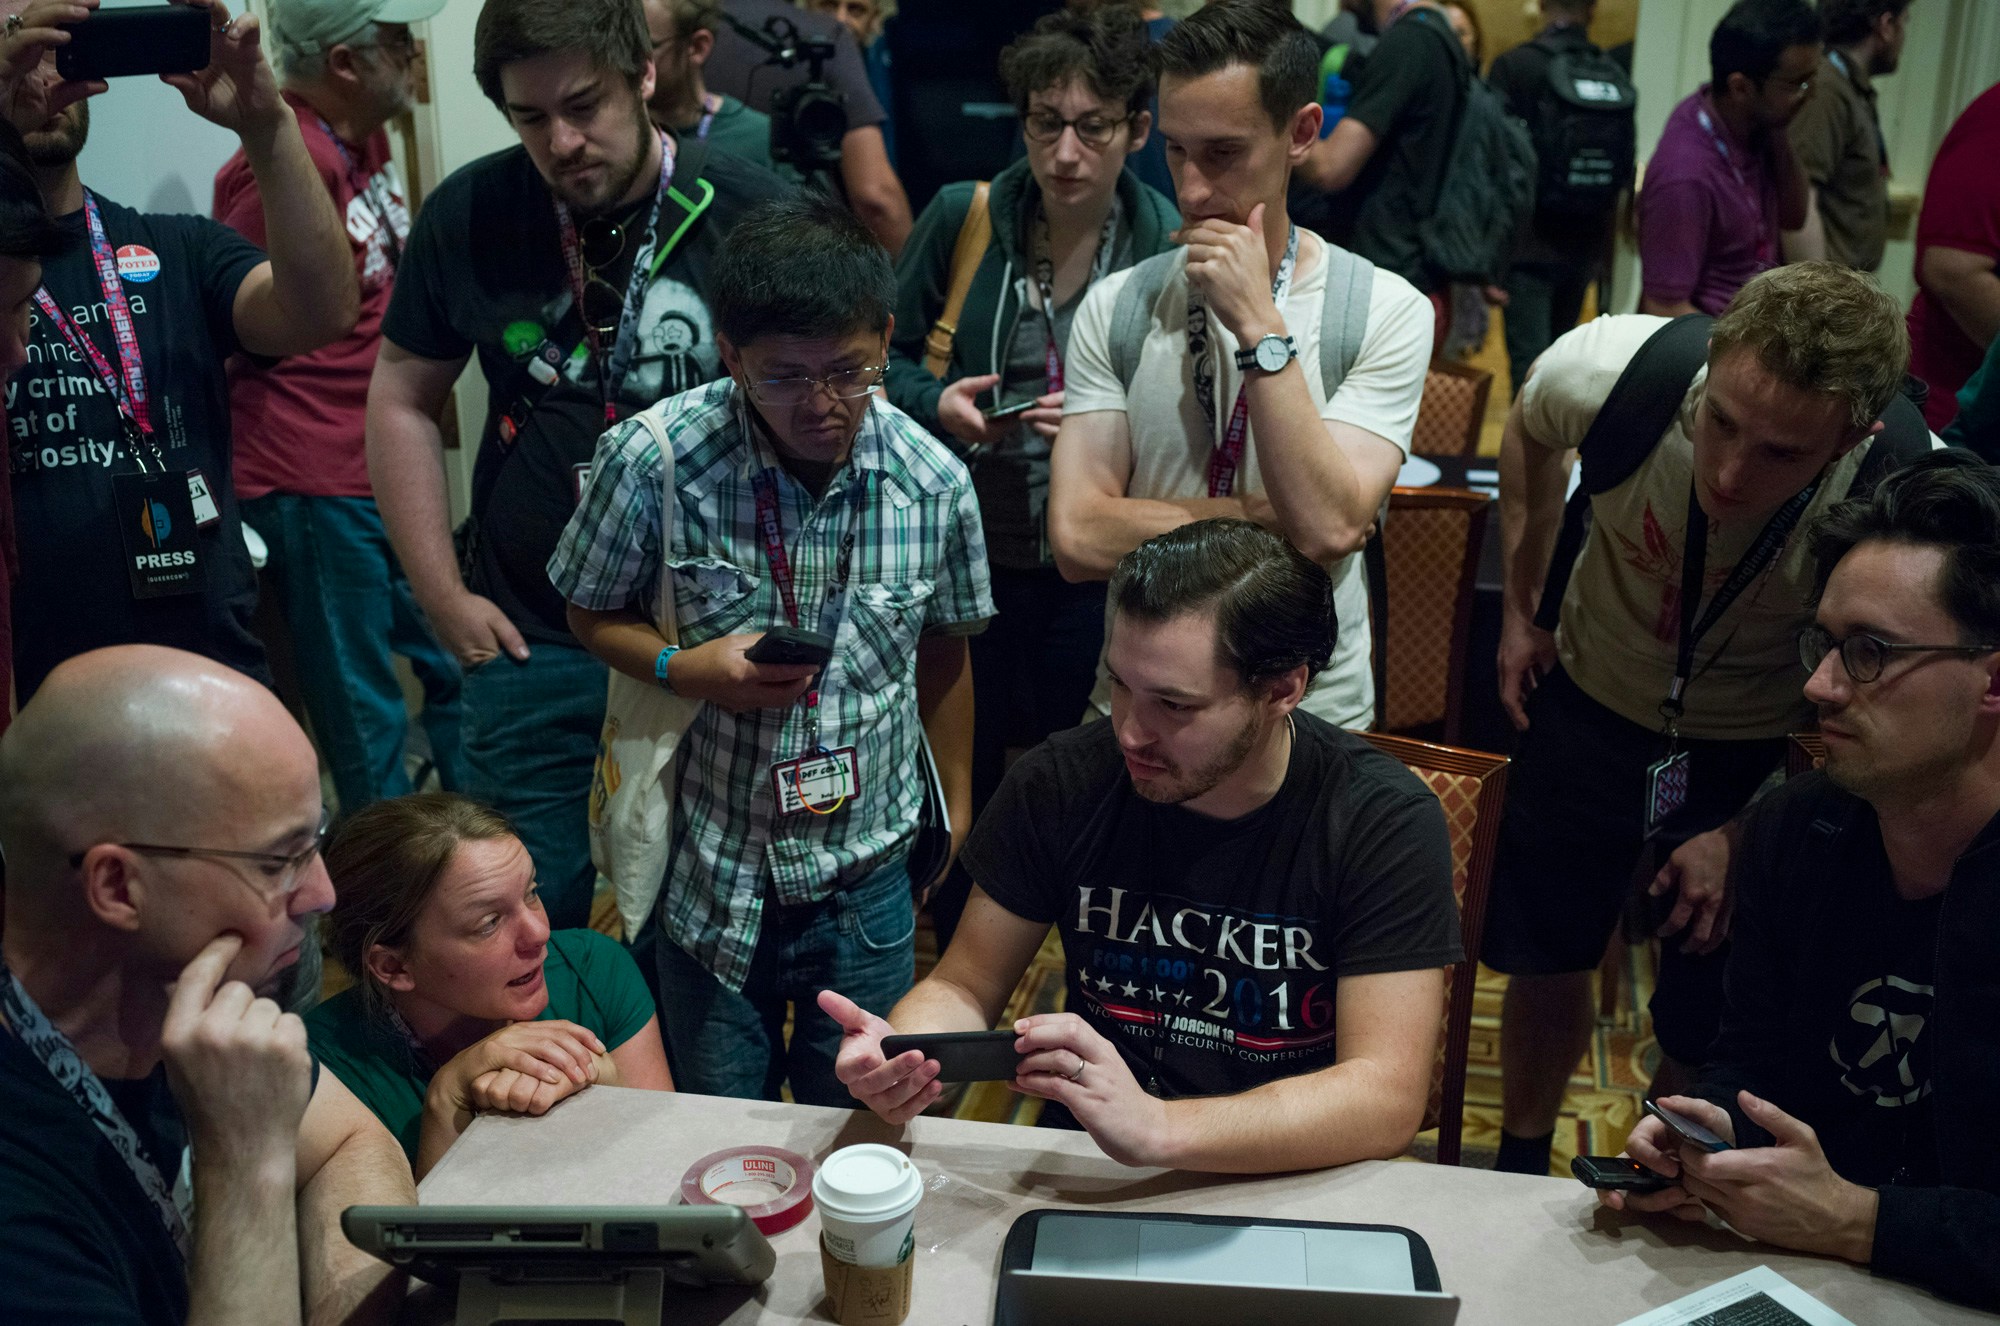 Hackers are let loose on a series of computerized voting machines during an event at Def Con in Las Vegas, July 28, 2017. An exemption to the Digital Millennium Copyright Act gave the researchers a temporary pass to experiment on voting machines. If there's a single lesson Americans have learned from the events of the past year, it might be this: Hackers are dangerous people. But what if the problem we face is not too many black-hat hackers, but too few white-hat ones? (Mark Ovaska/The New York Times)